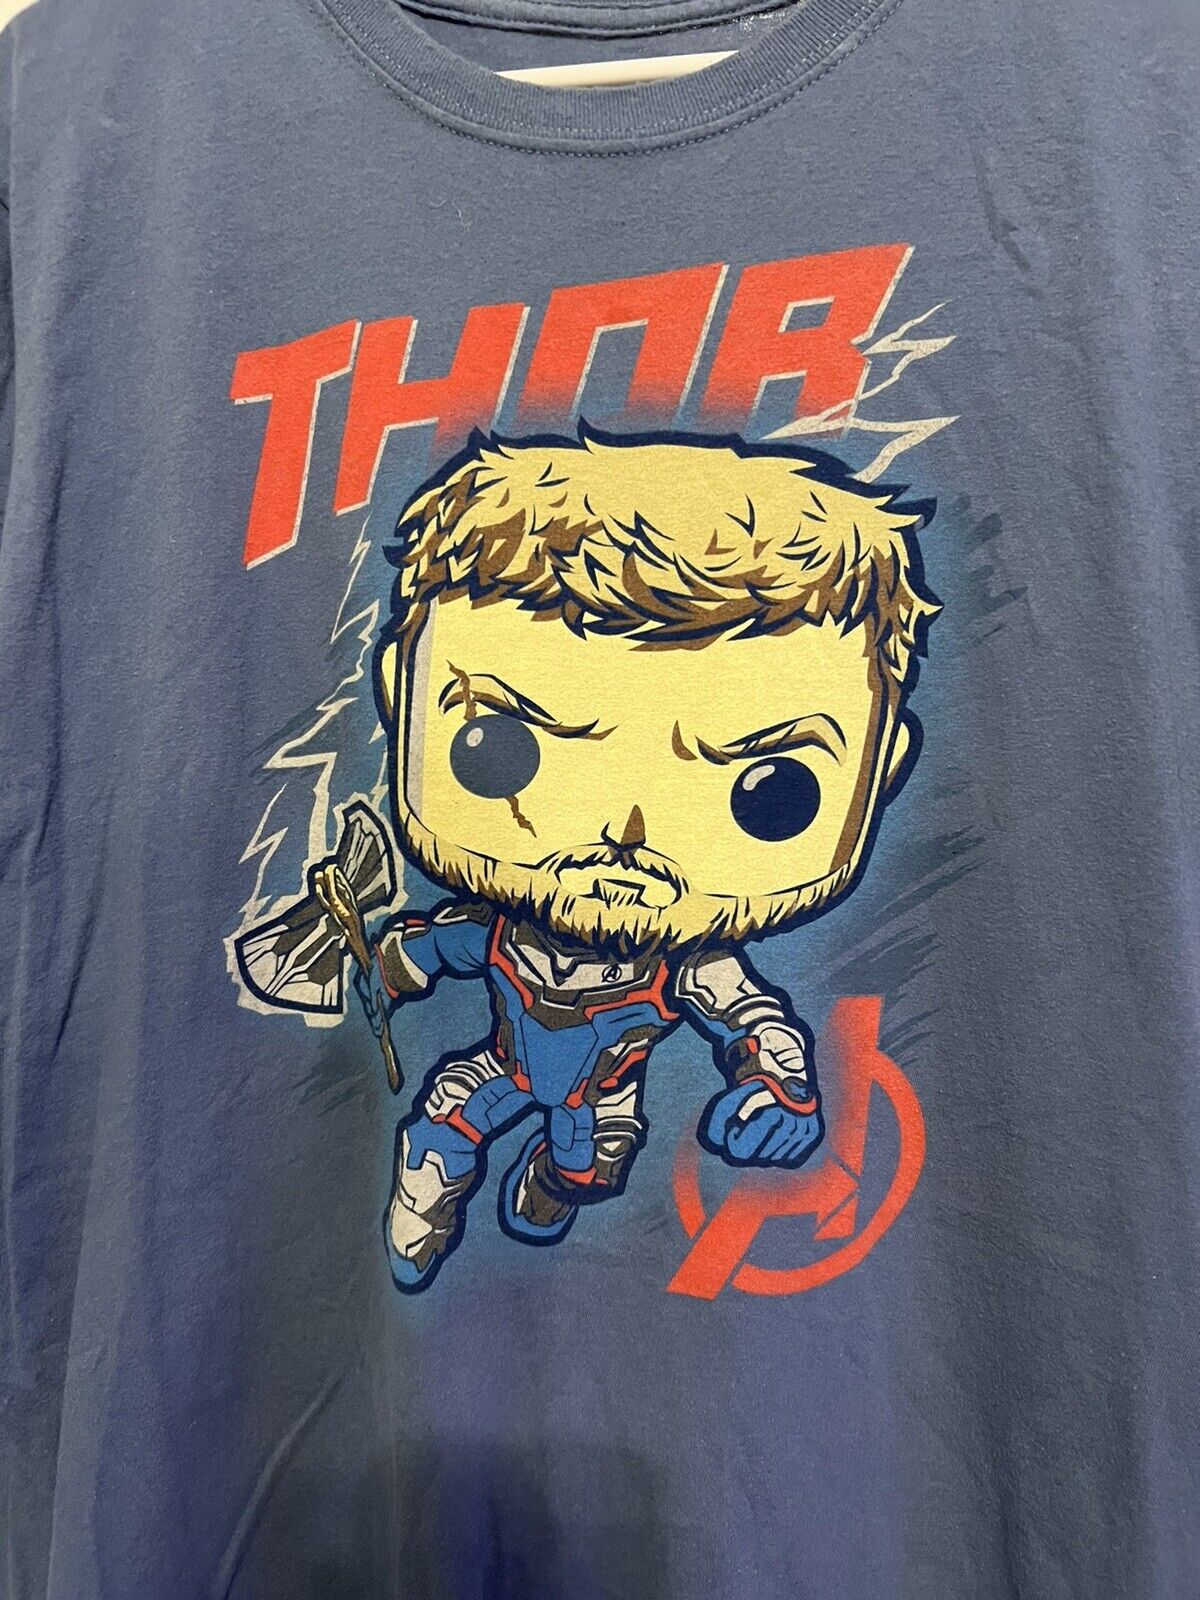 Funko POP! Tees Marvel Avengers End Game Thor T-shirt (Blue) Size M